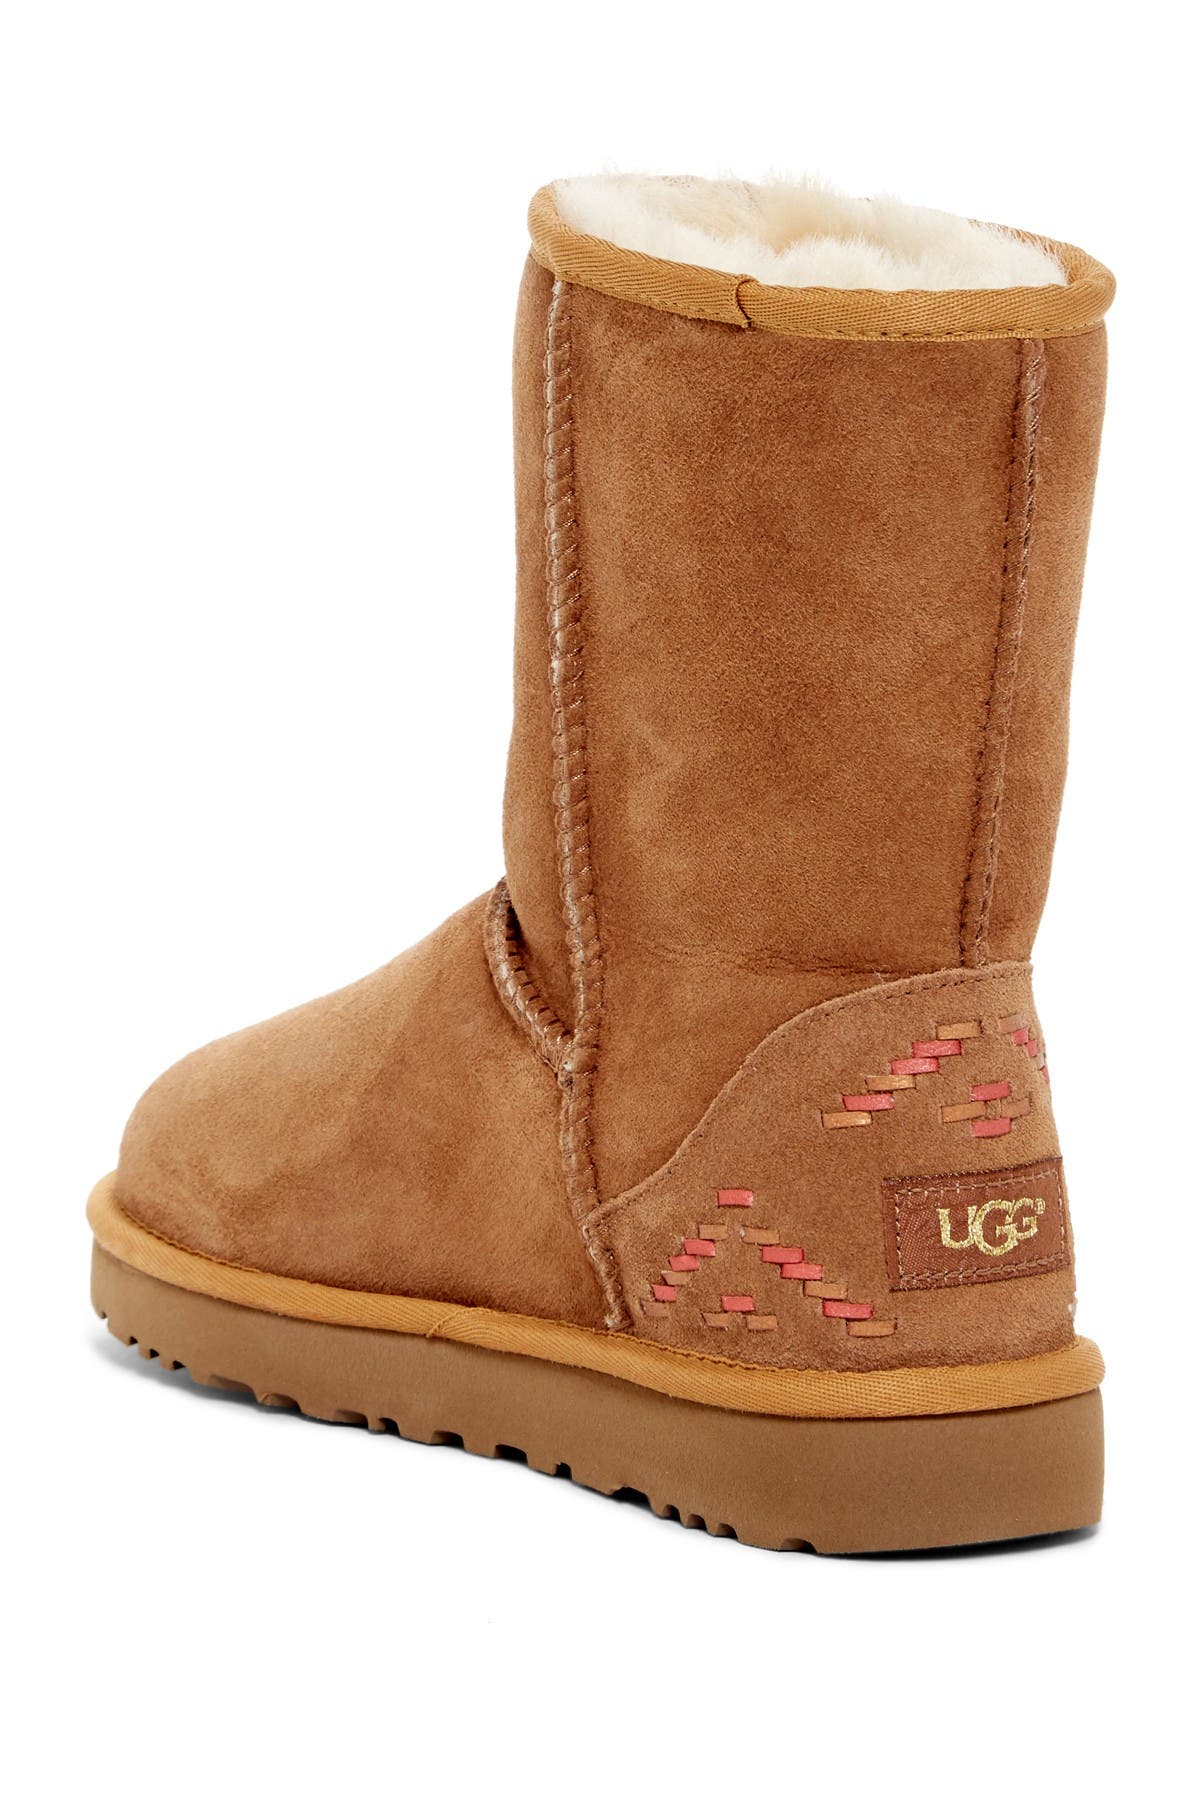 rustic weave ugg boots